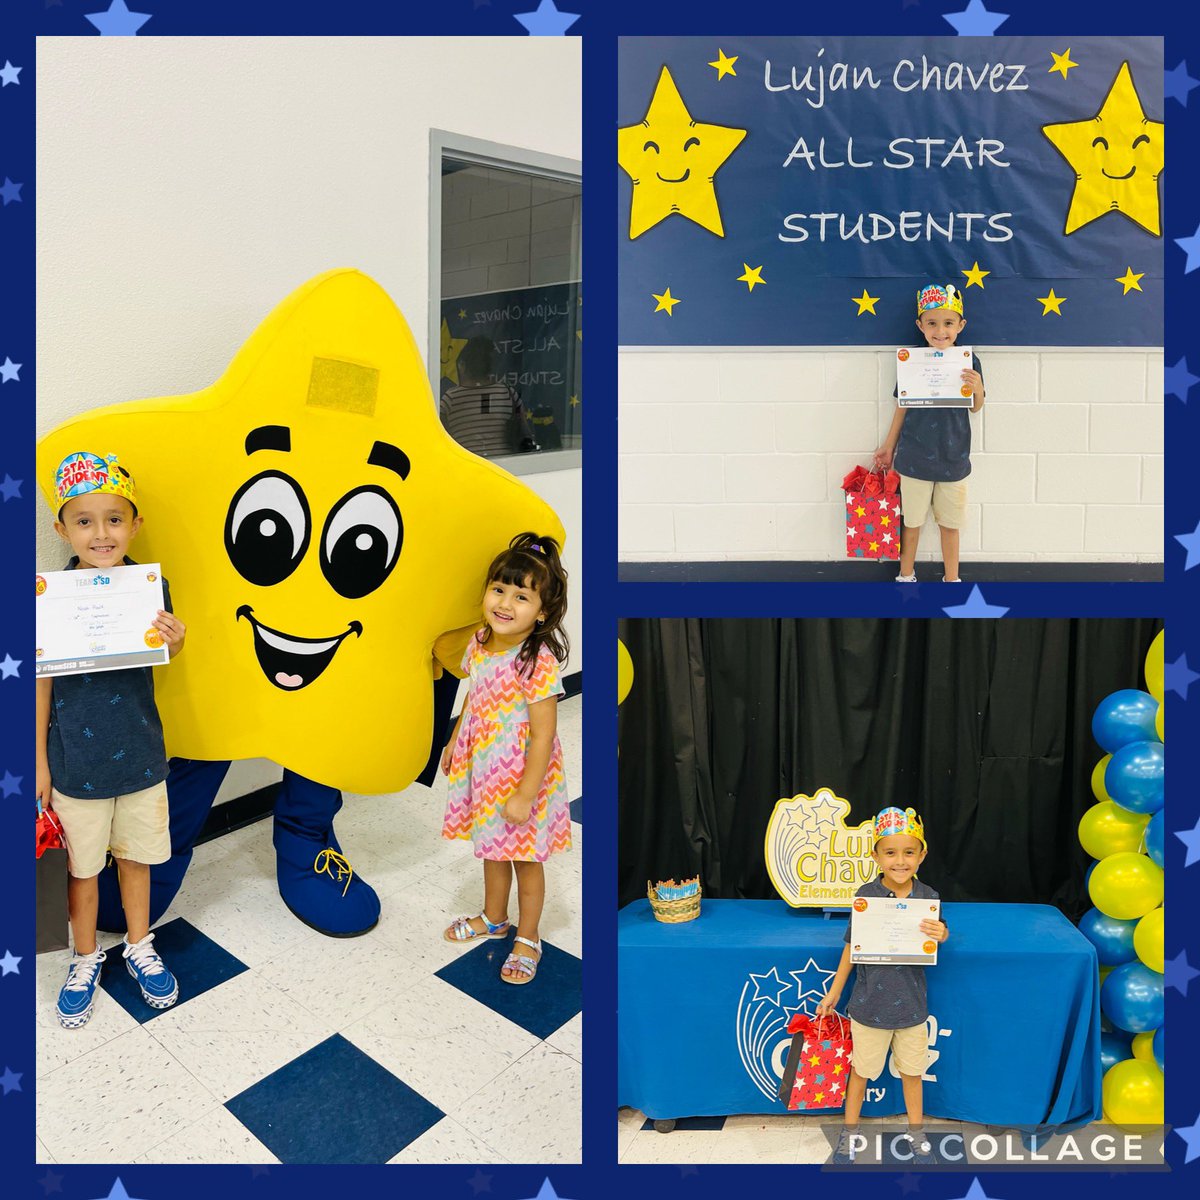 Keep shining bright my Love!! So very proud of you!! Thank you @ggarza_LCES & @LChavez_ES for recognizing this Little Star!!! 🌟💙 #BetterTogether #TeamSISD